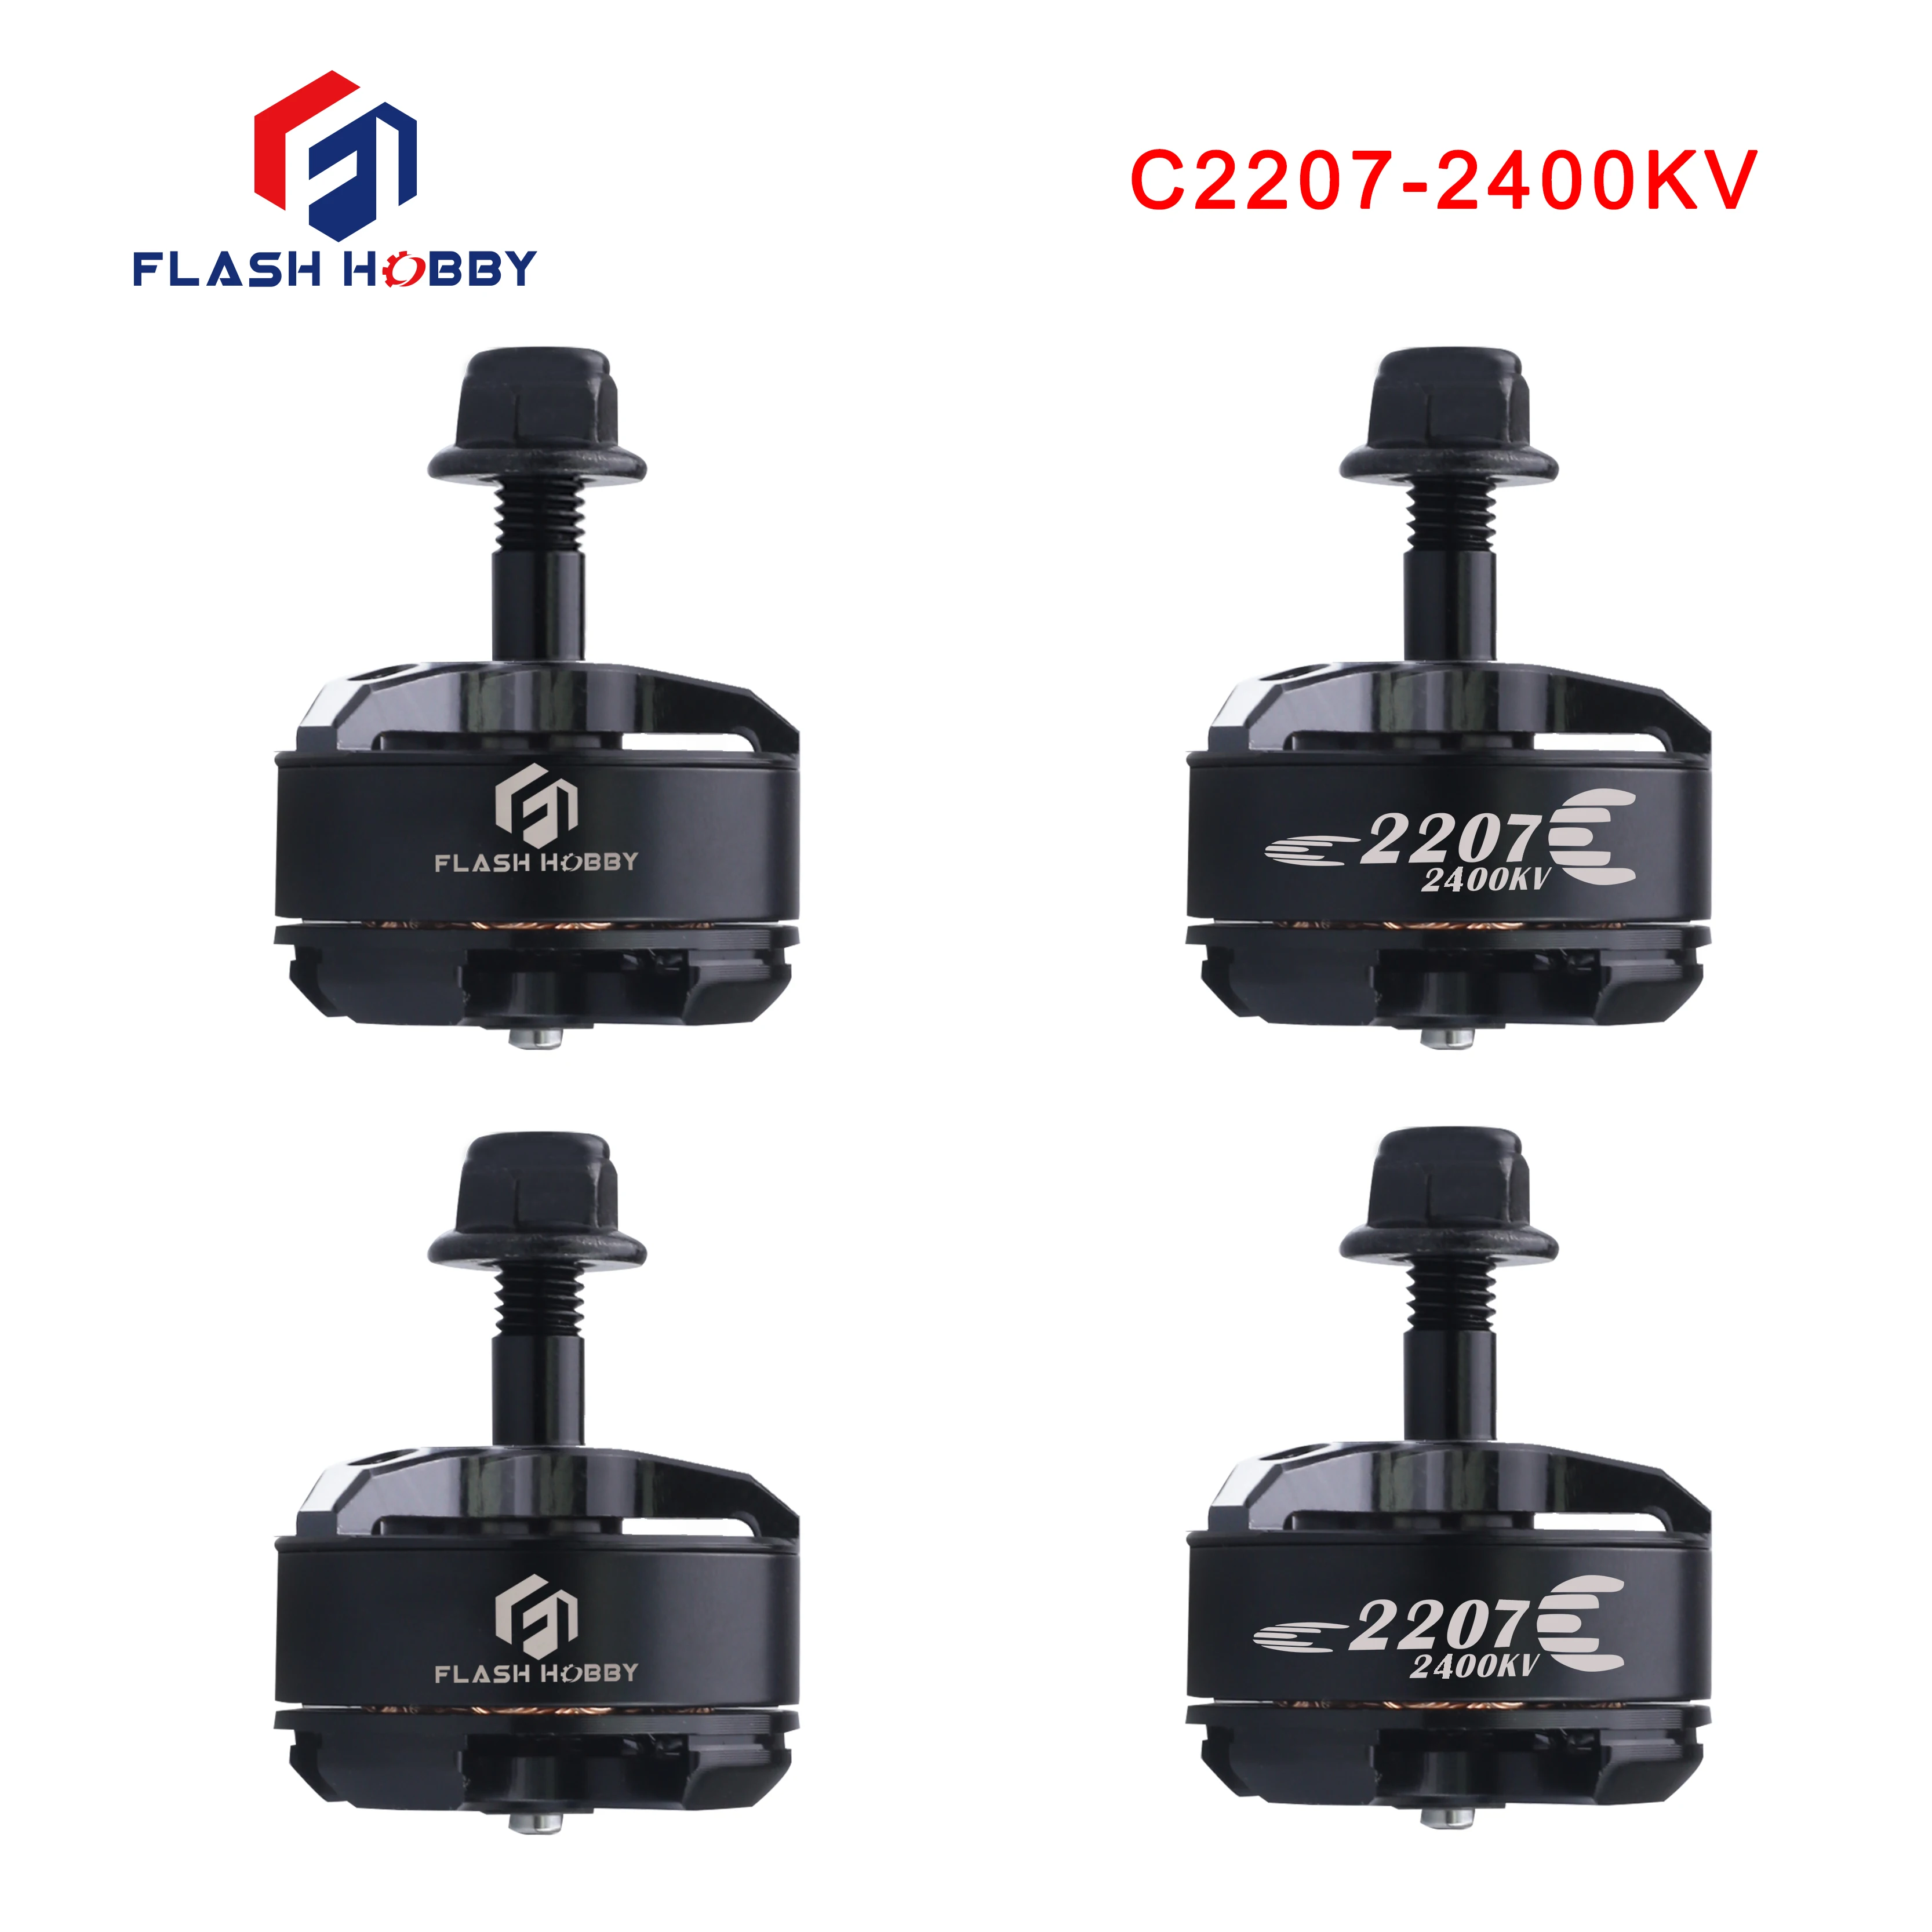 

4pcs/Lot Flash Hobby C2207 2400KV CW/CCW Brushless Motor for FPV Racing Multicopter Part